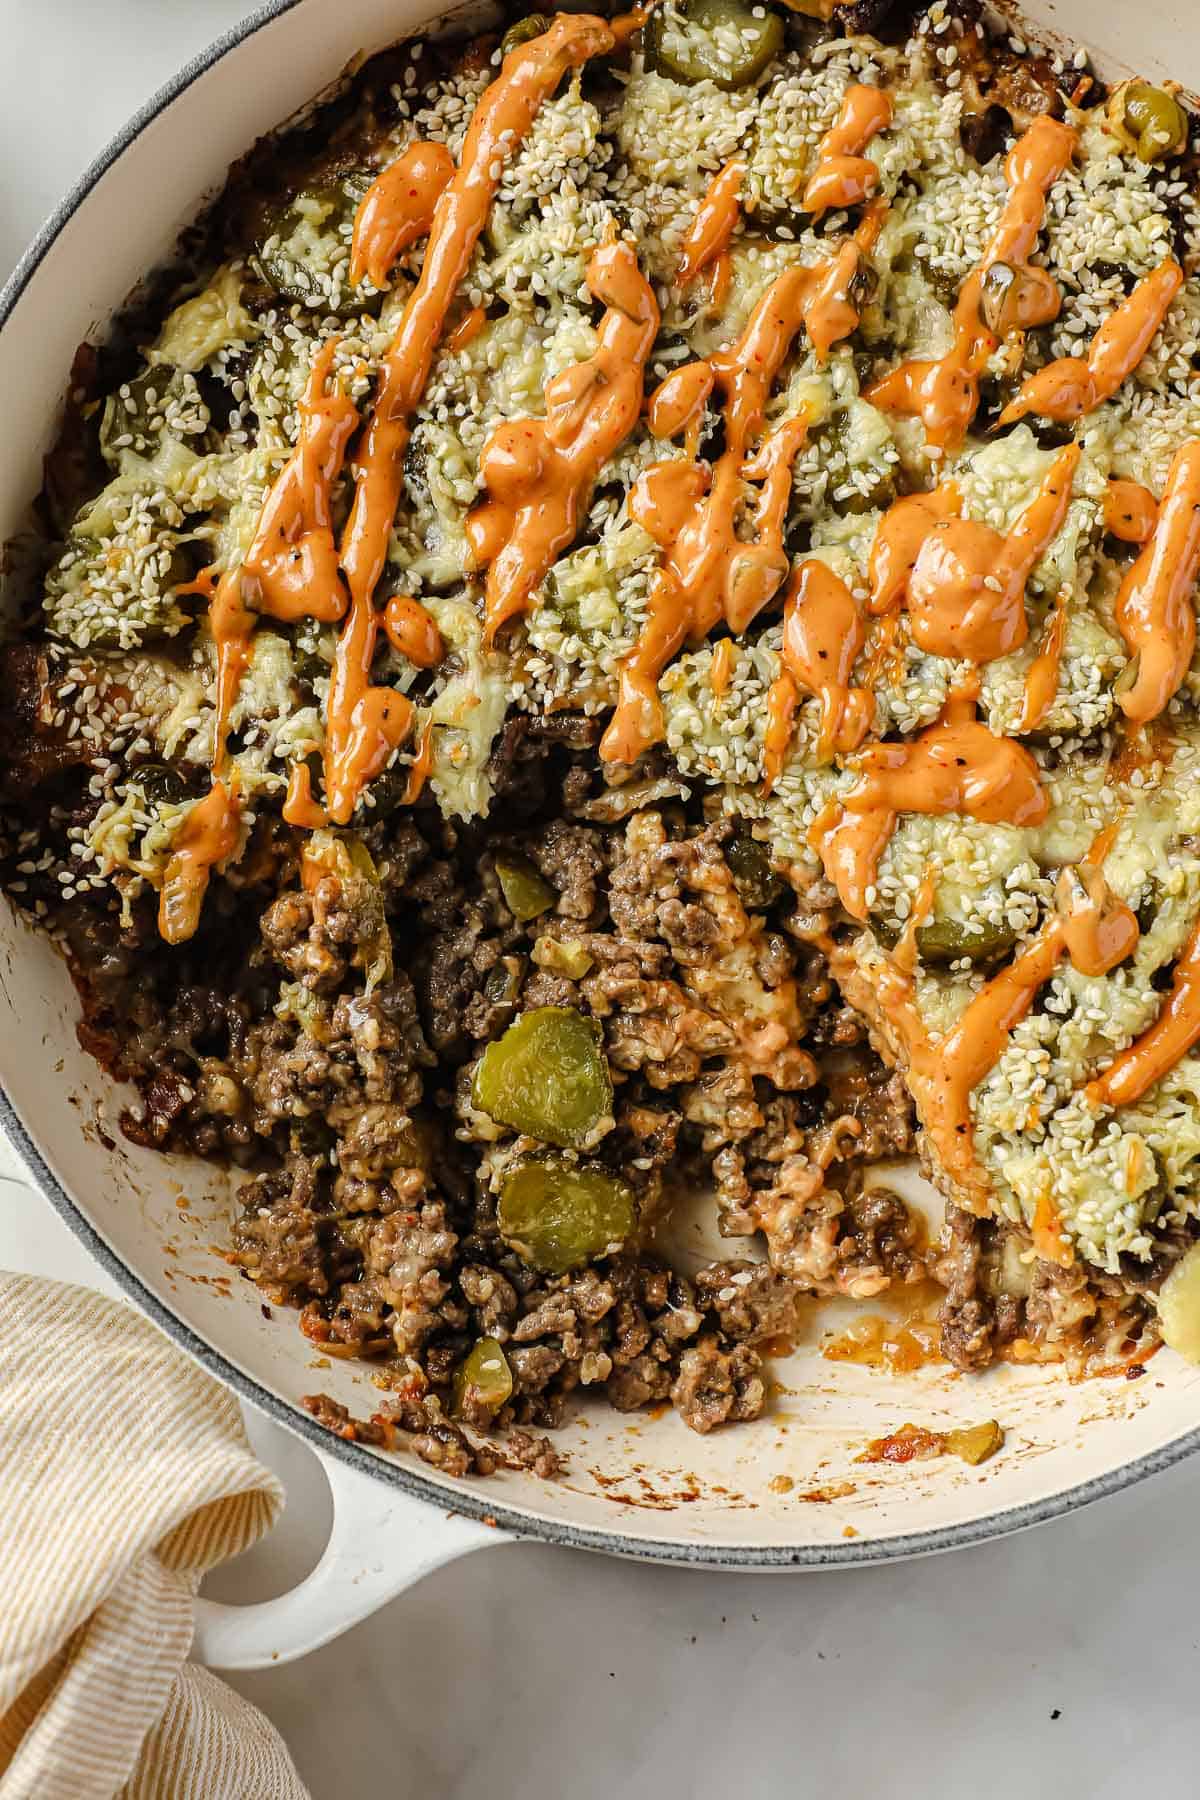 a cast iron pan, full of big Mac casserole made with ground beef, burger sauce, cheese, pickles, onions and sesame seeds